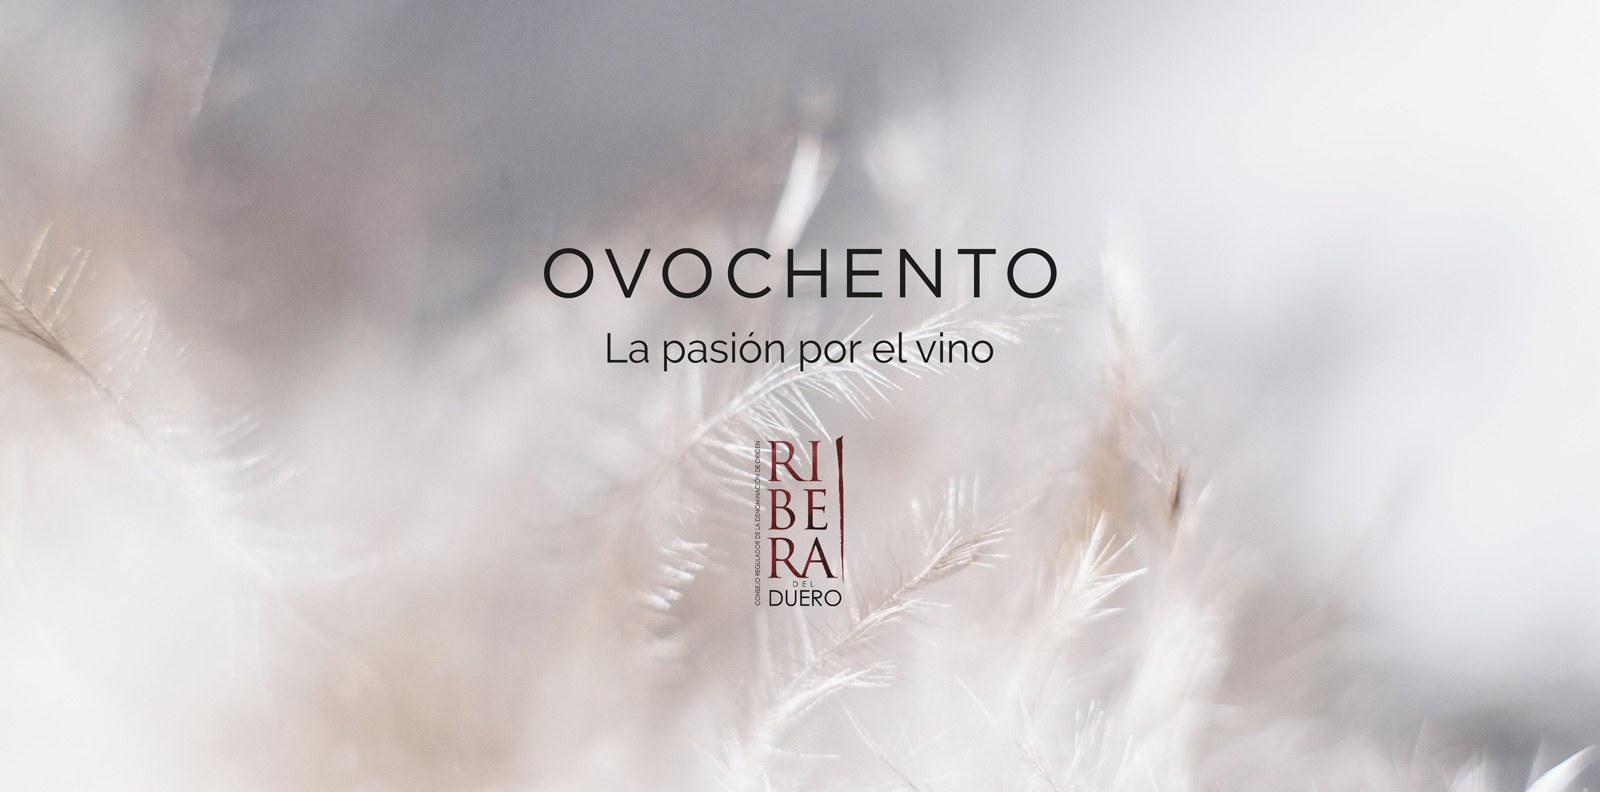 Graphic and creative design of wine labels and packaging for OVOCHENTO